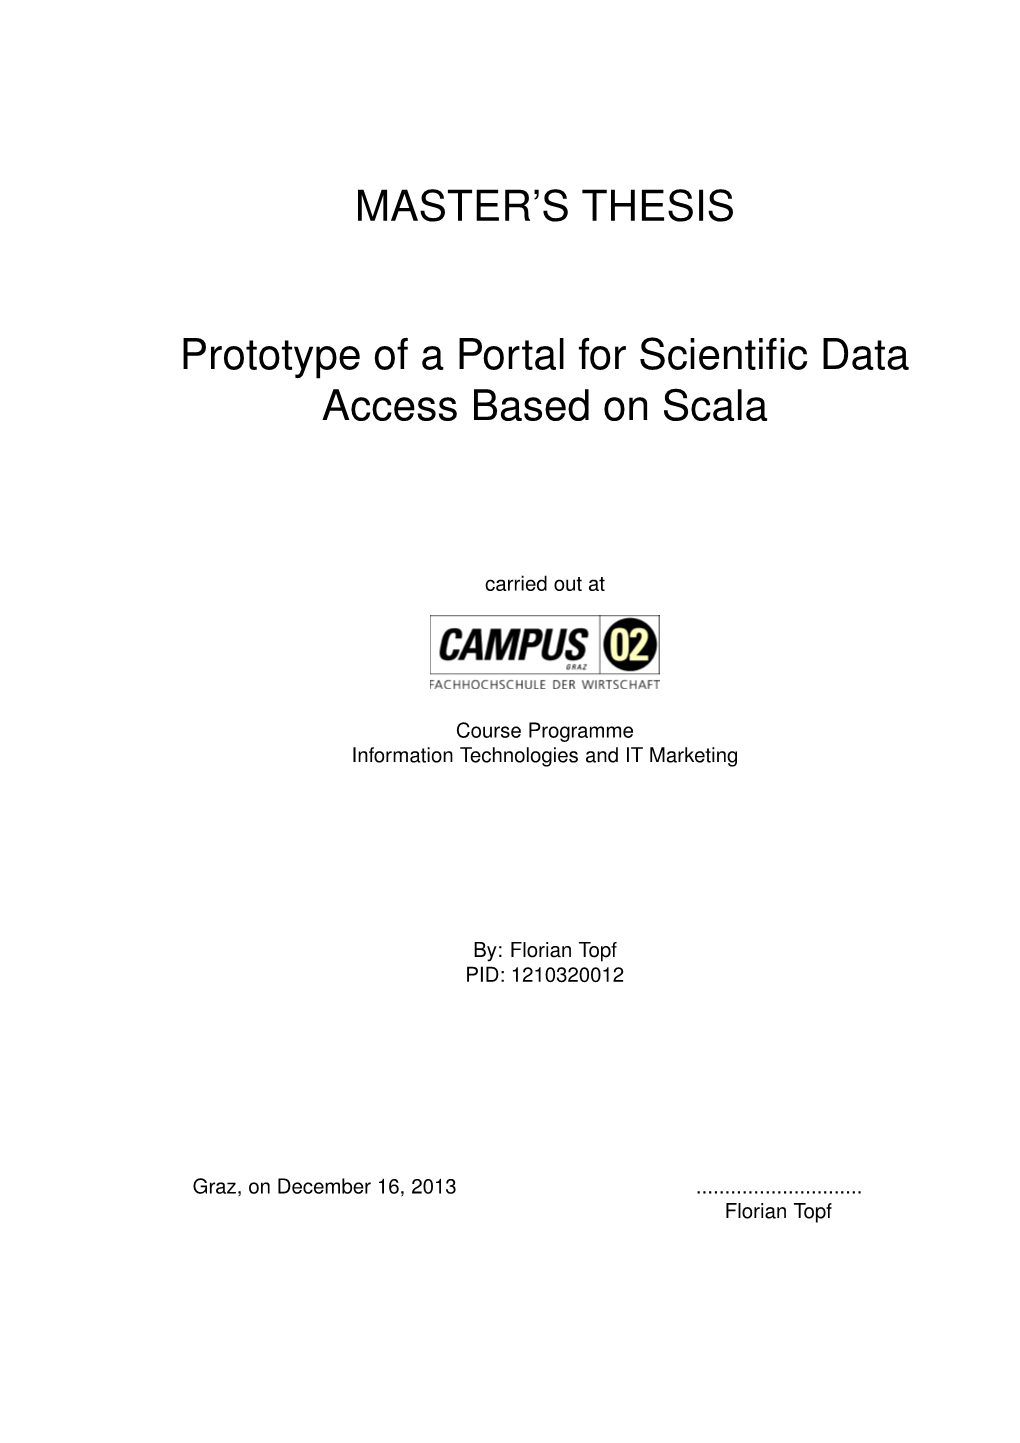 Prototype of a Portal for Scientific Data Access Based on Scala